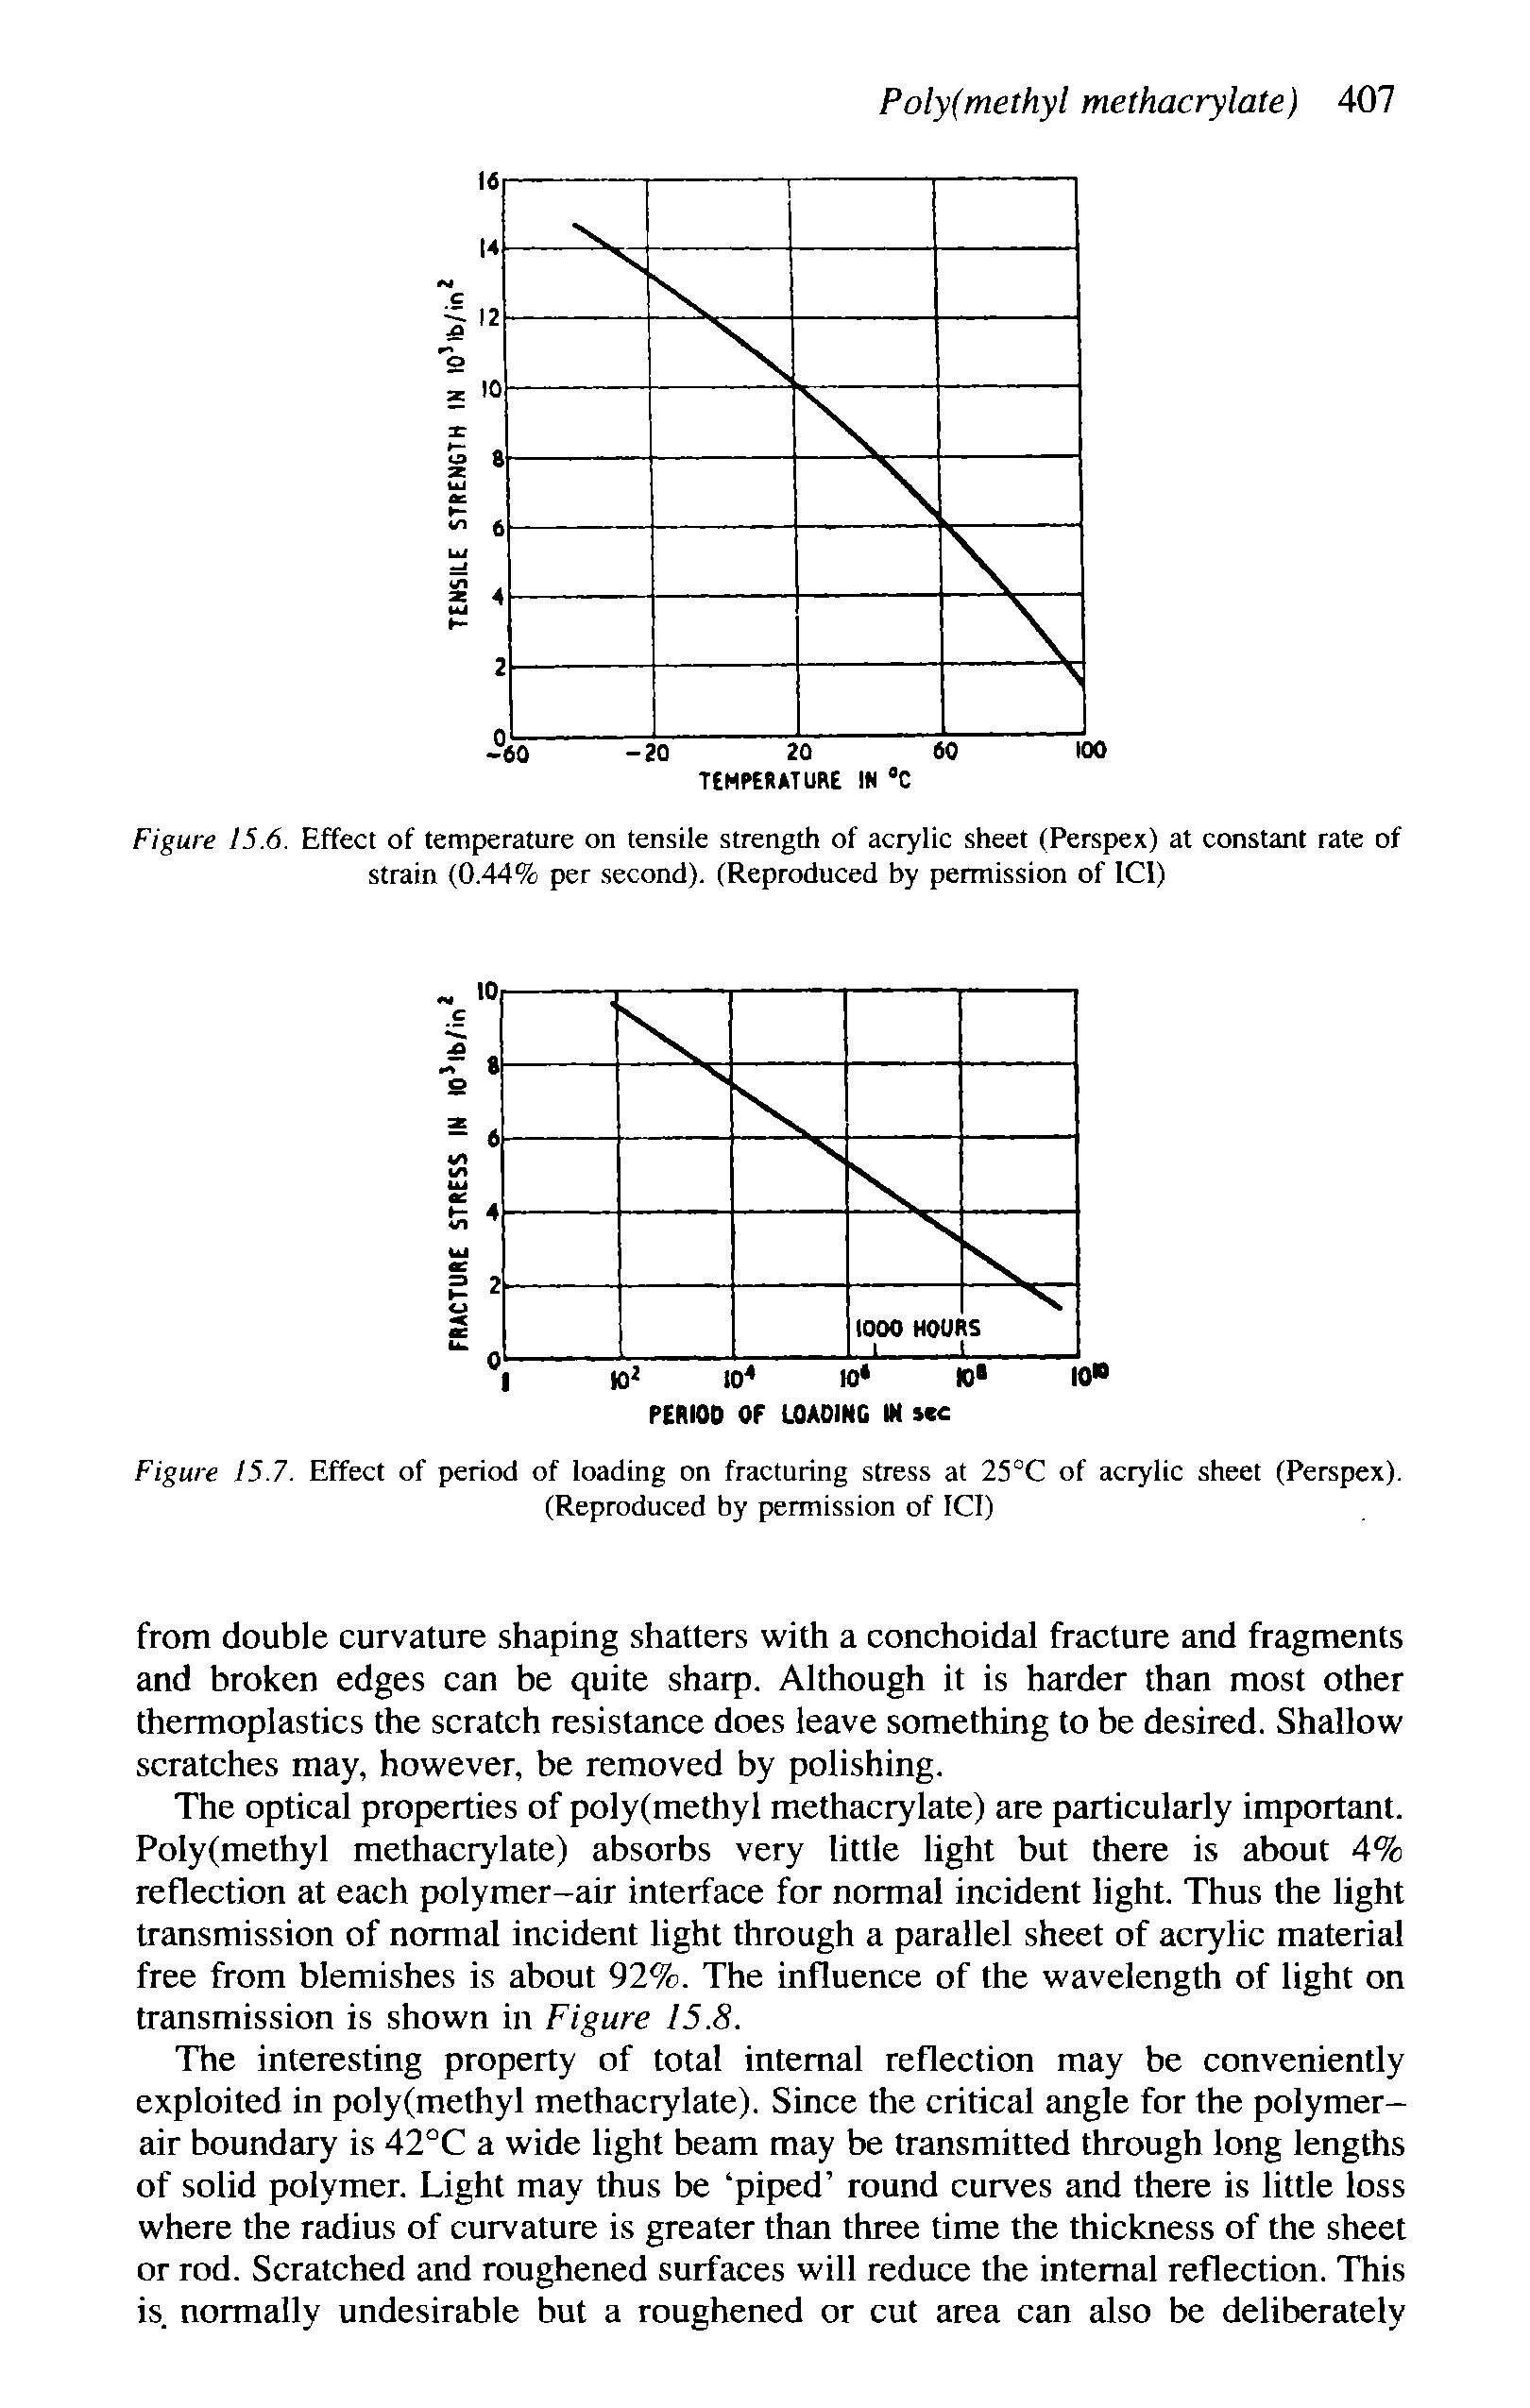 Figure 15.7. Effect of period of loading on fracturing stress at 25°C of acrylic sheet (Perspex). (Reproduced by permission of ICI)...